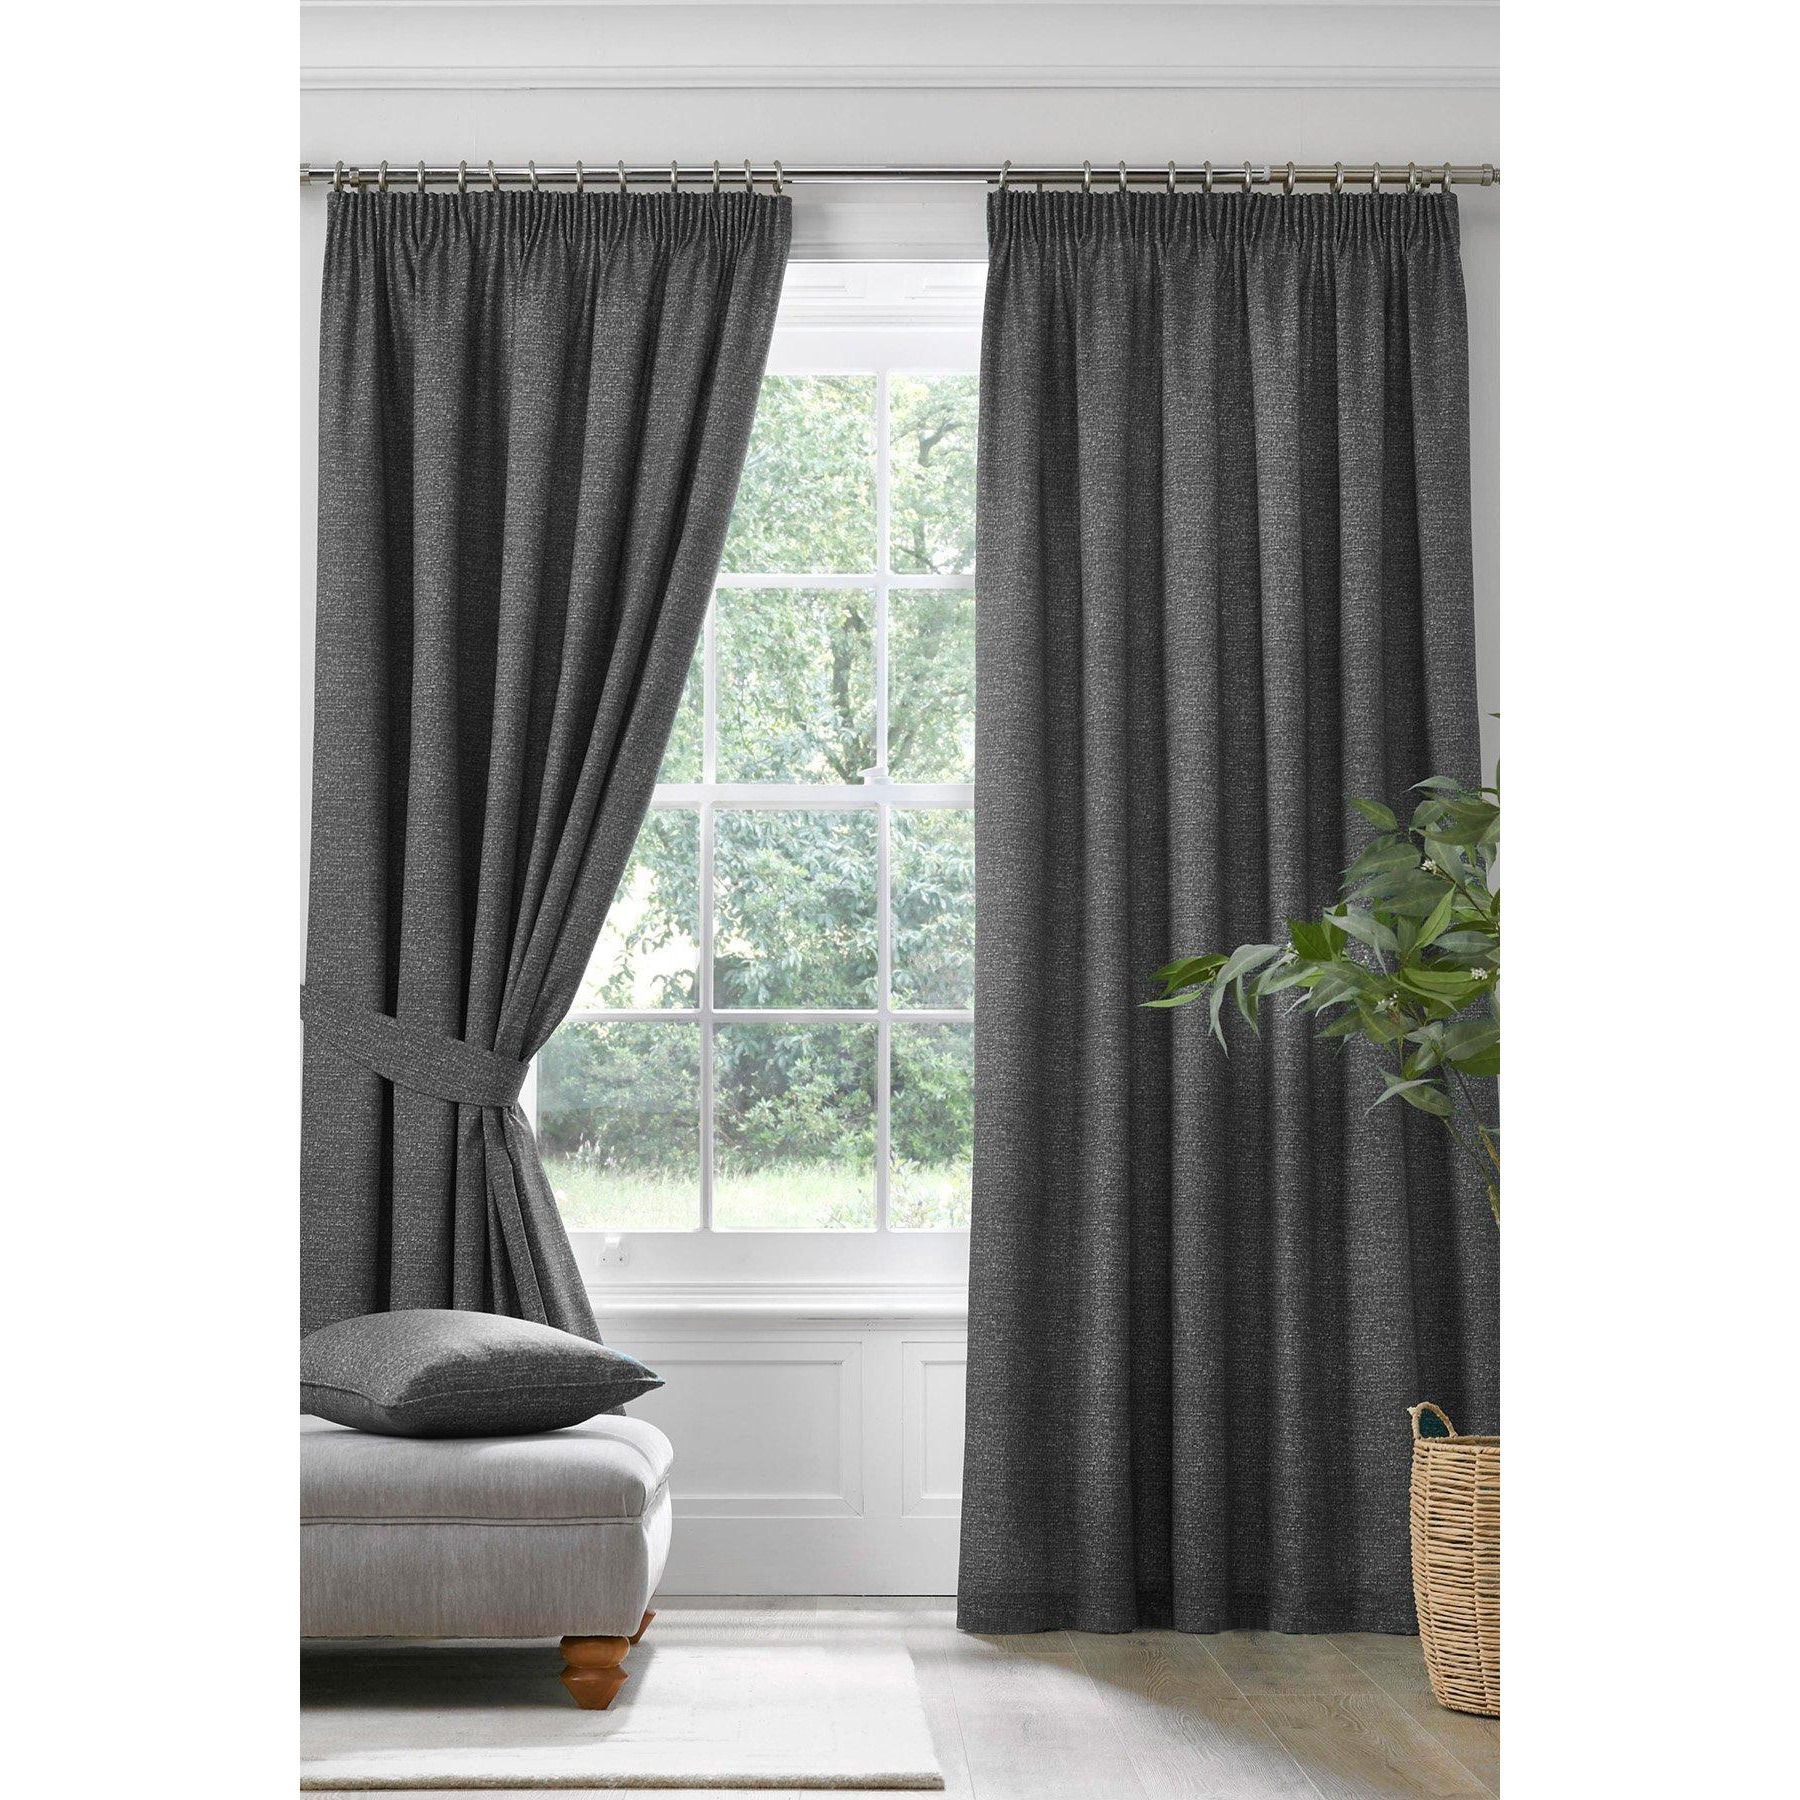 'Pembrey' Textured Pair of Pencil Pleat Curtains With Tie-Backs - image 1